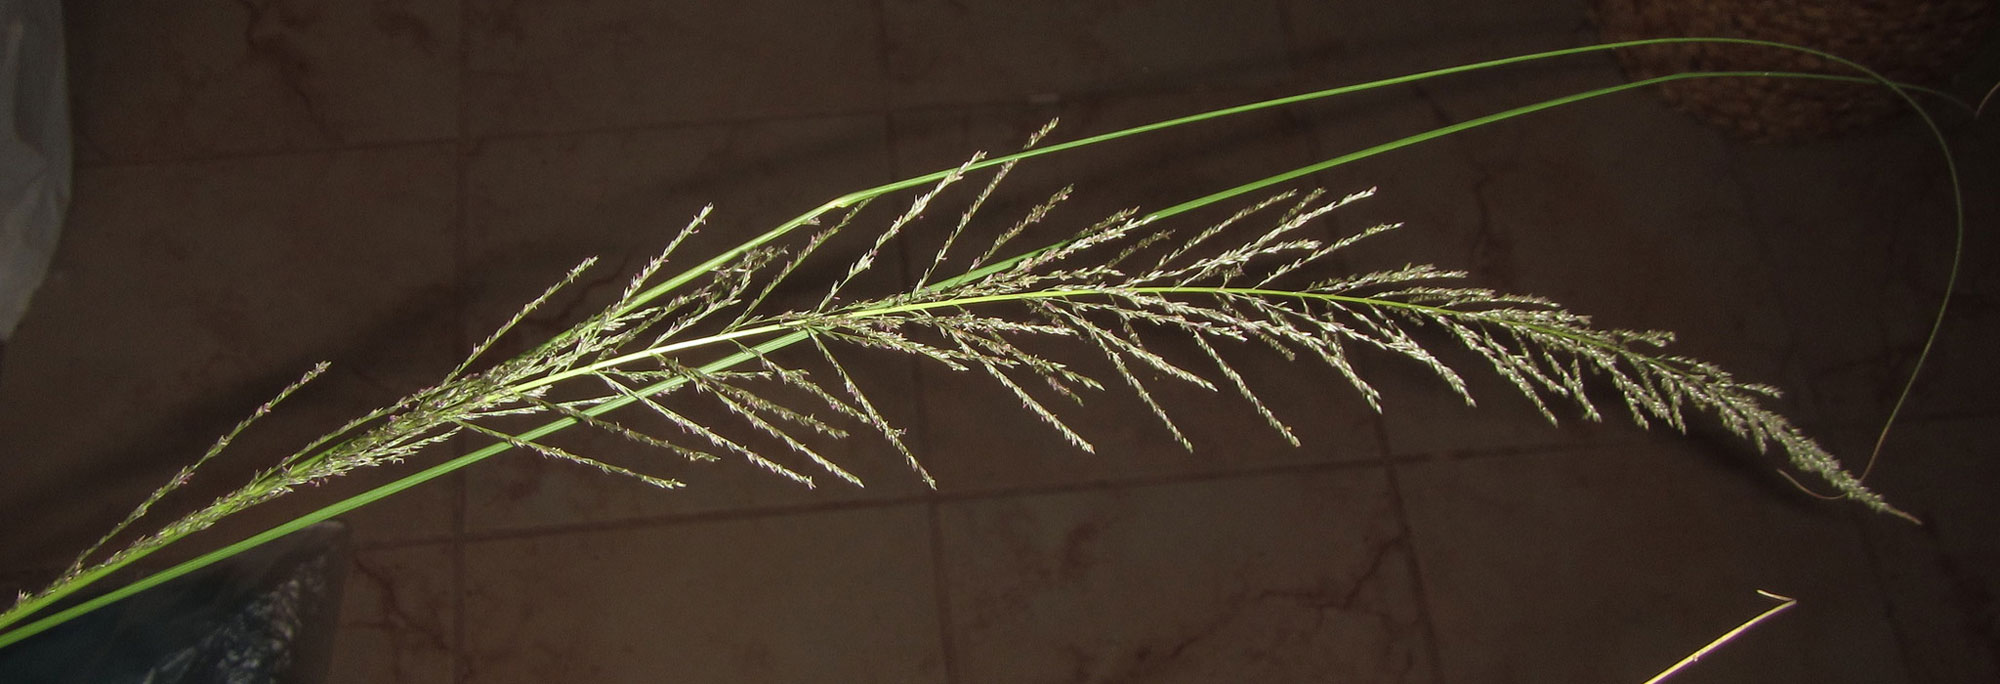 A grass inflorescence photographed against a tile floor. The inflorescence has a central rachis with feathery lateral branches.